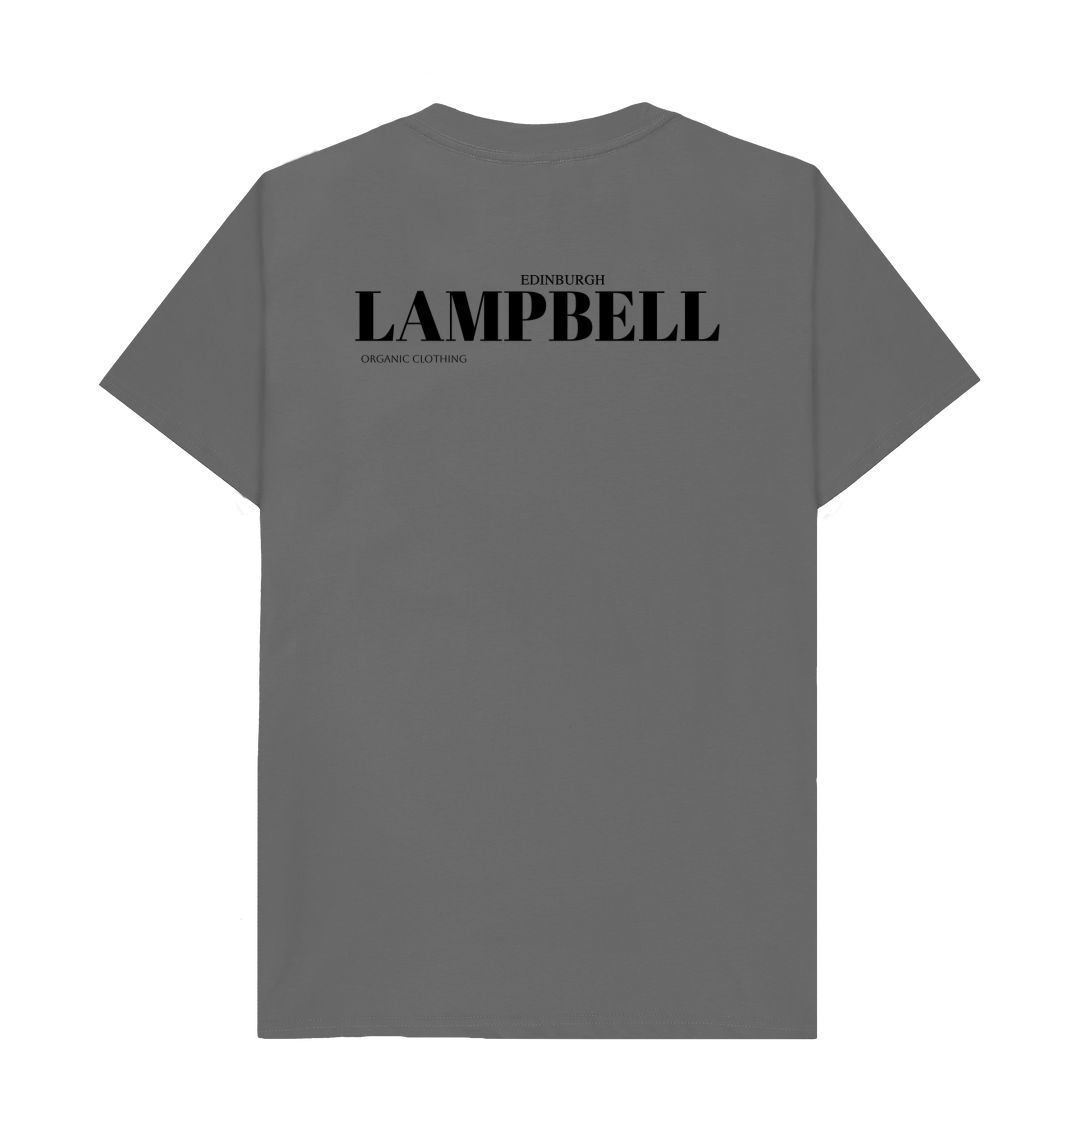 Lampbell Clothing